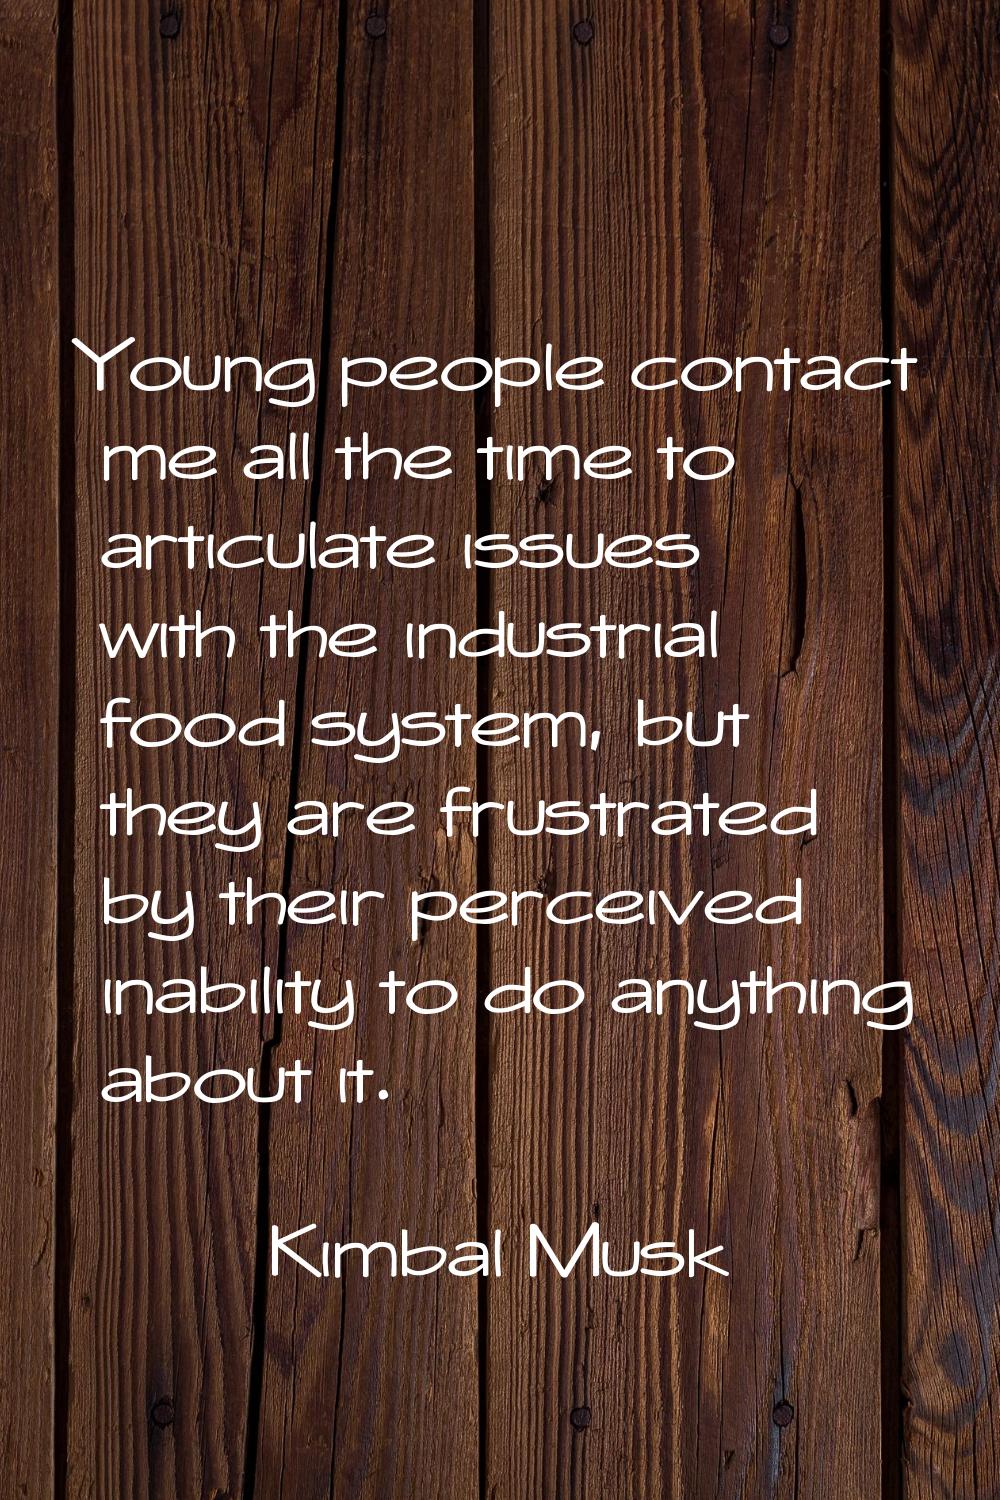 Young people contact me all the time to articulate issues with the industrial food system, but they